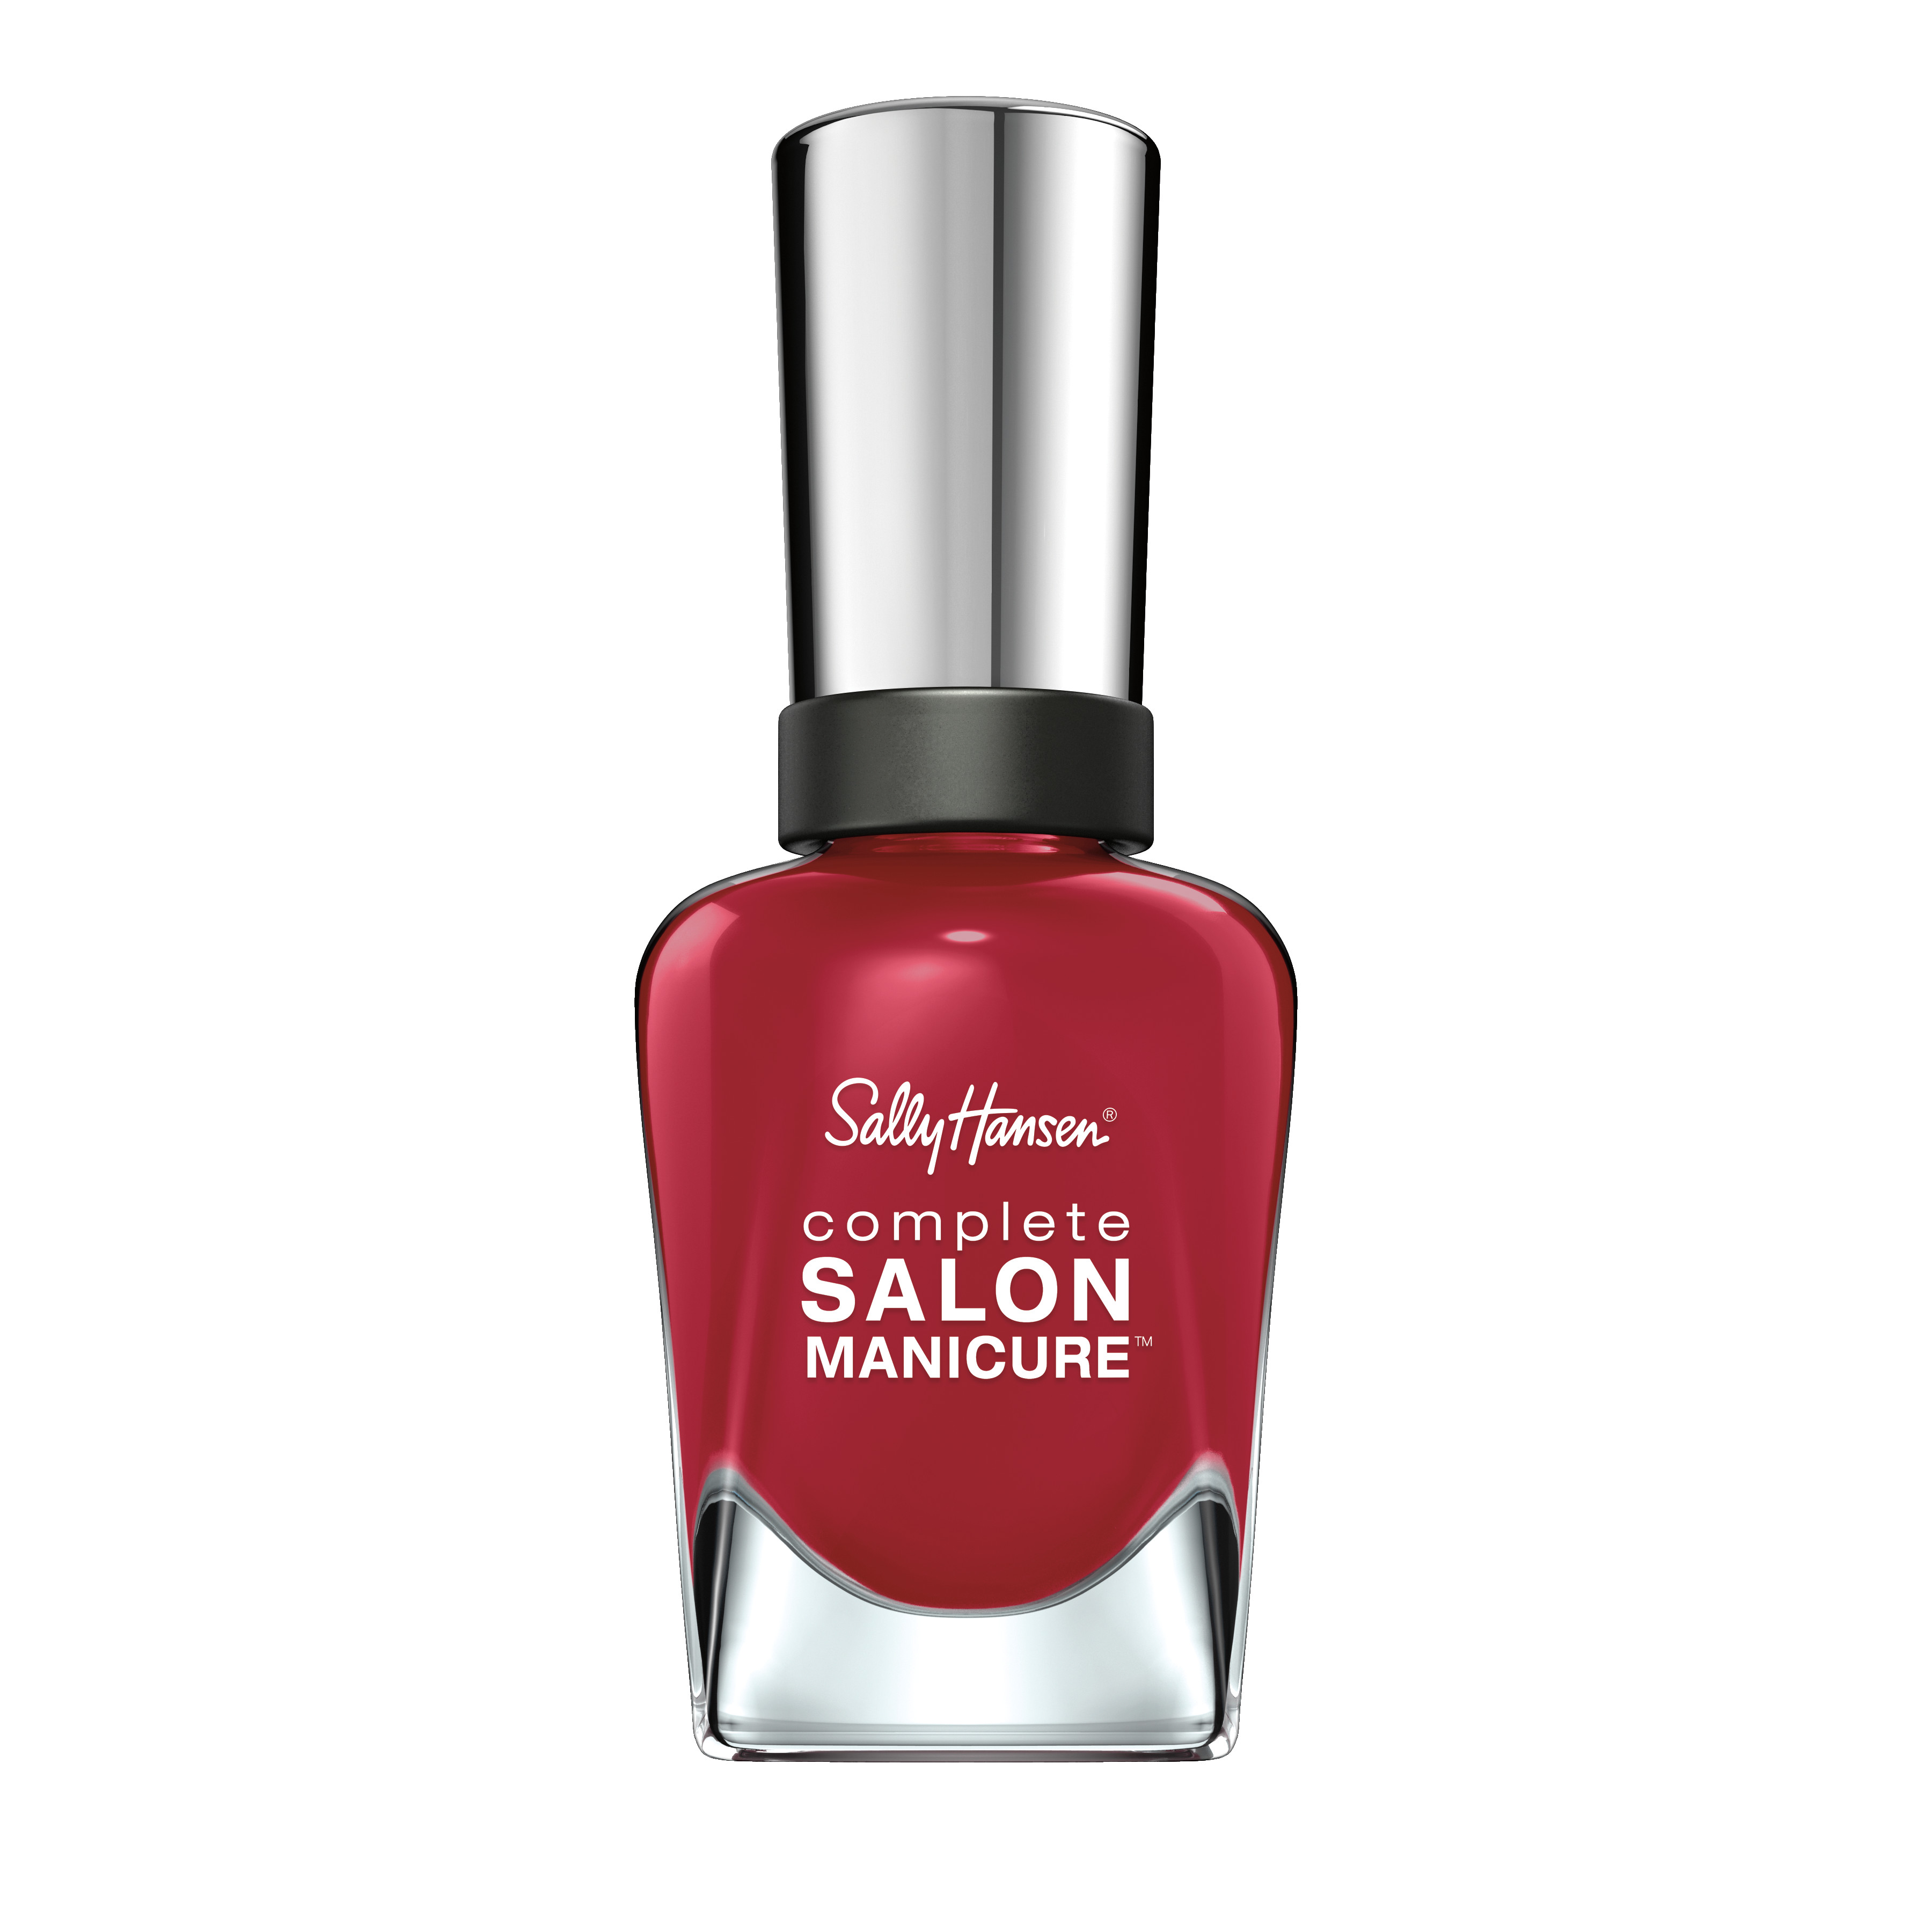 Sally Hansen Complete Salon Manicure Nail Color, Red It Online - image 1 of 2